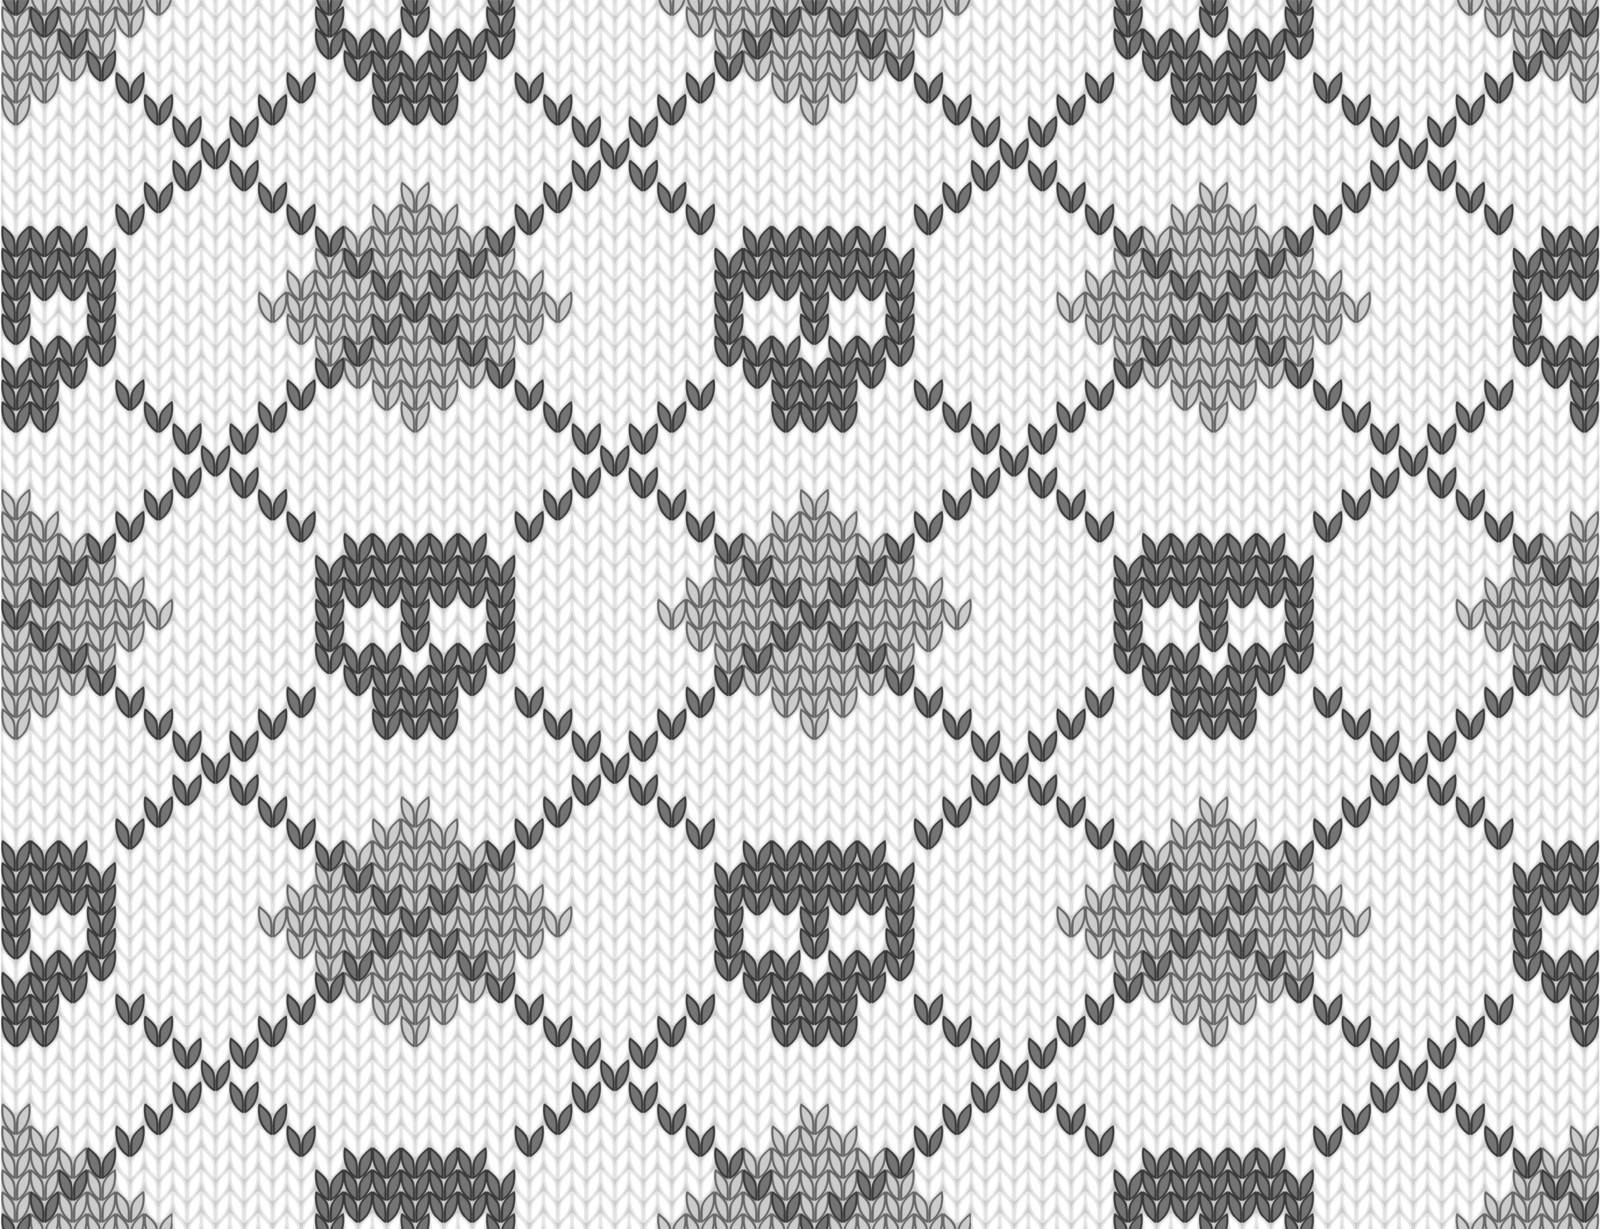 Seamless knitted pattern with skulls. EPS 8 vector illustration.